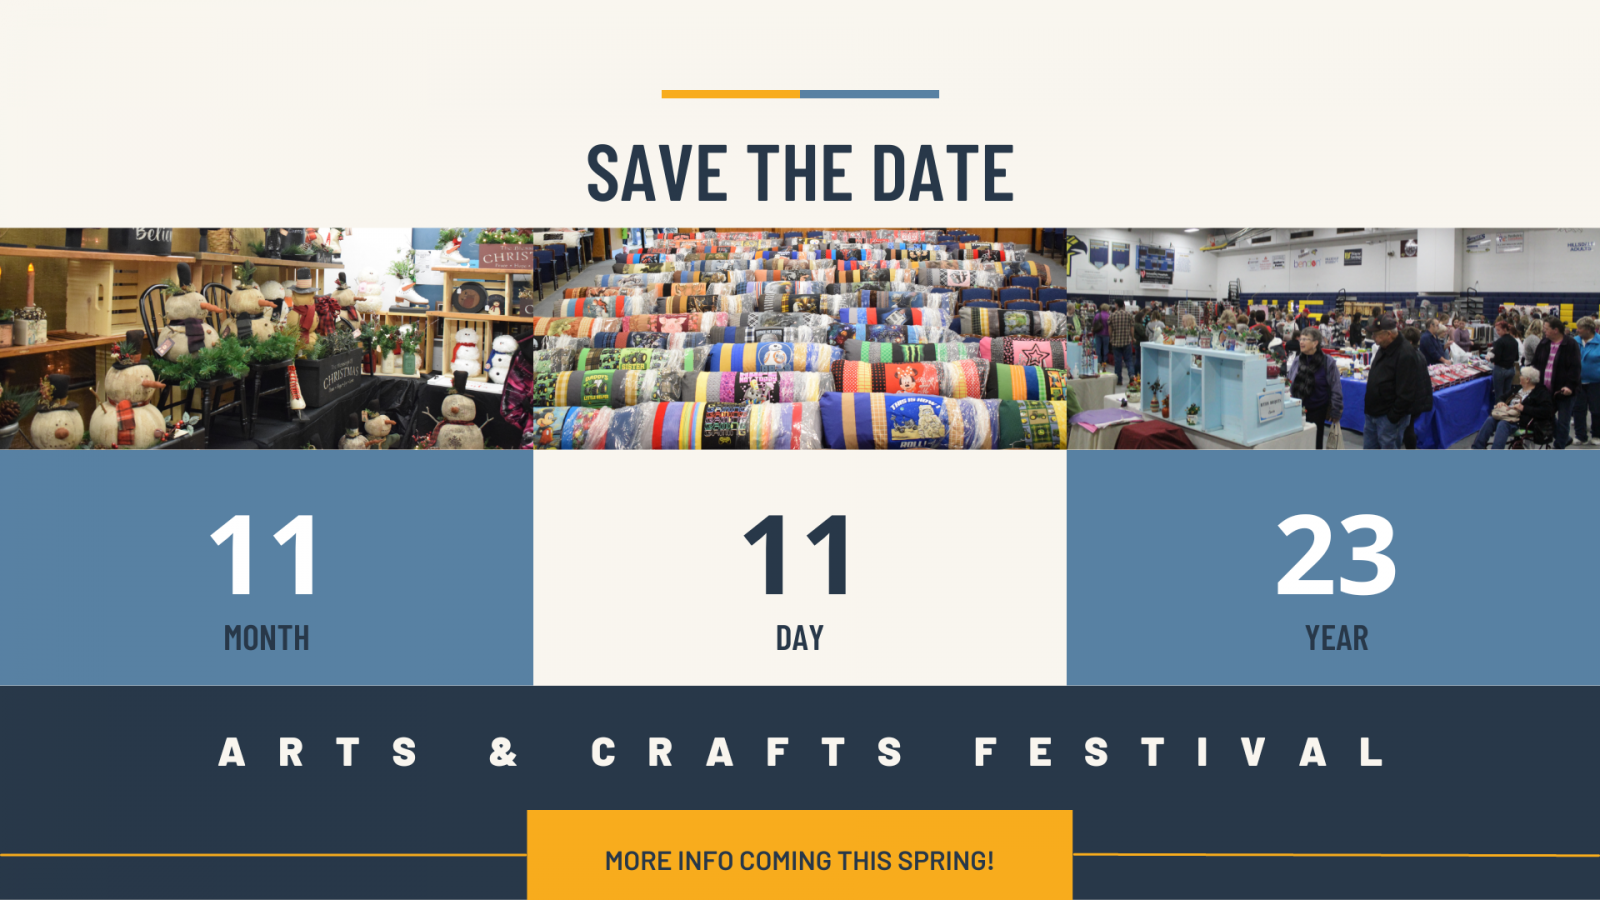 An image of the arts and crafts festival to save the date of November 11, 2023. More information to be shared this spring.